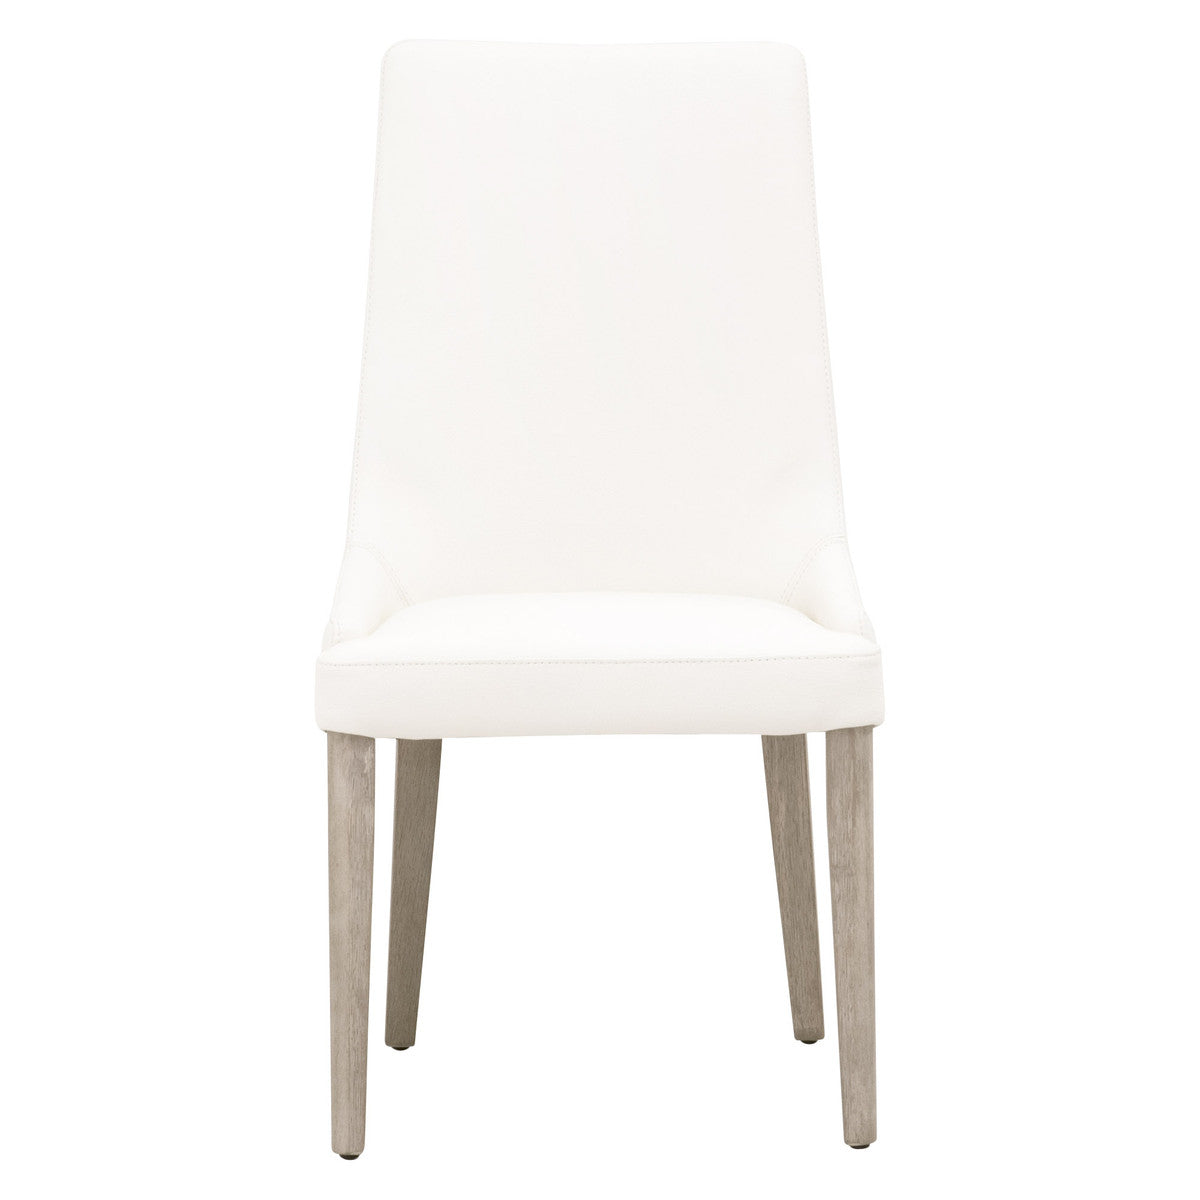 Aura Dining Chair - Set of (2)